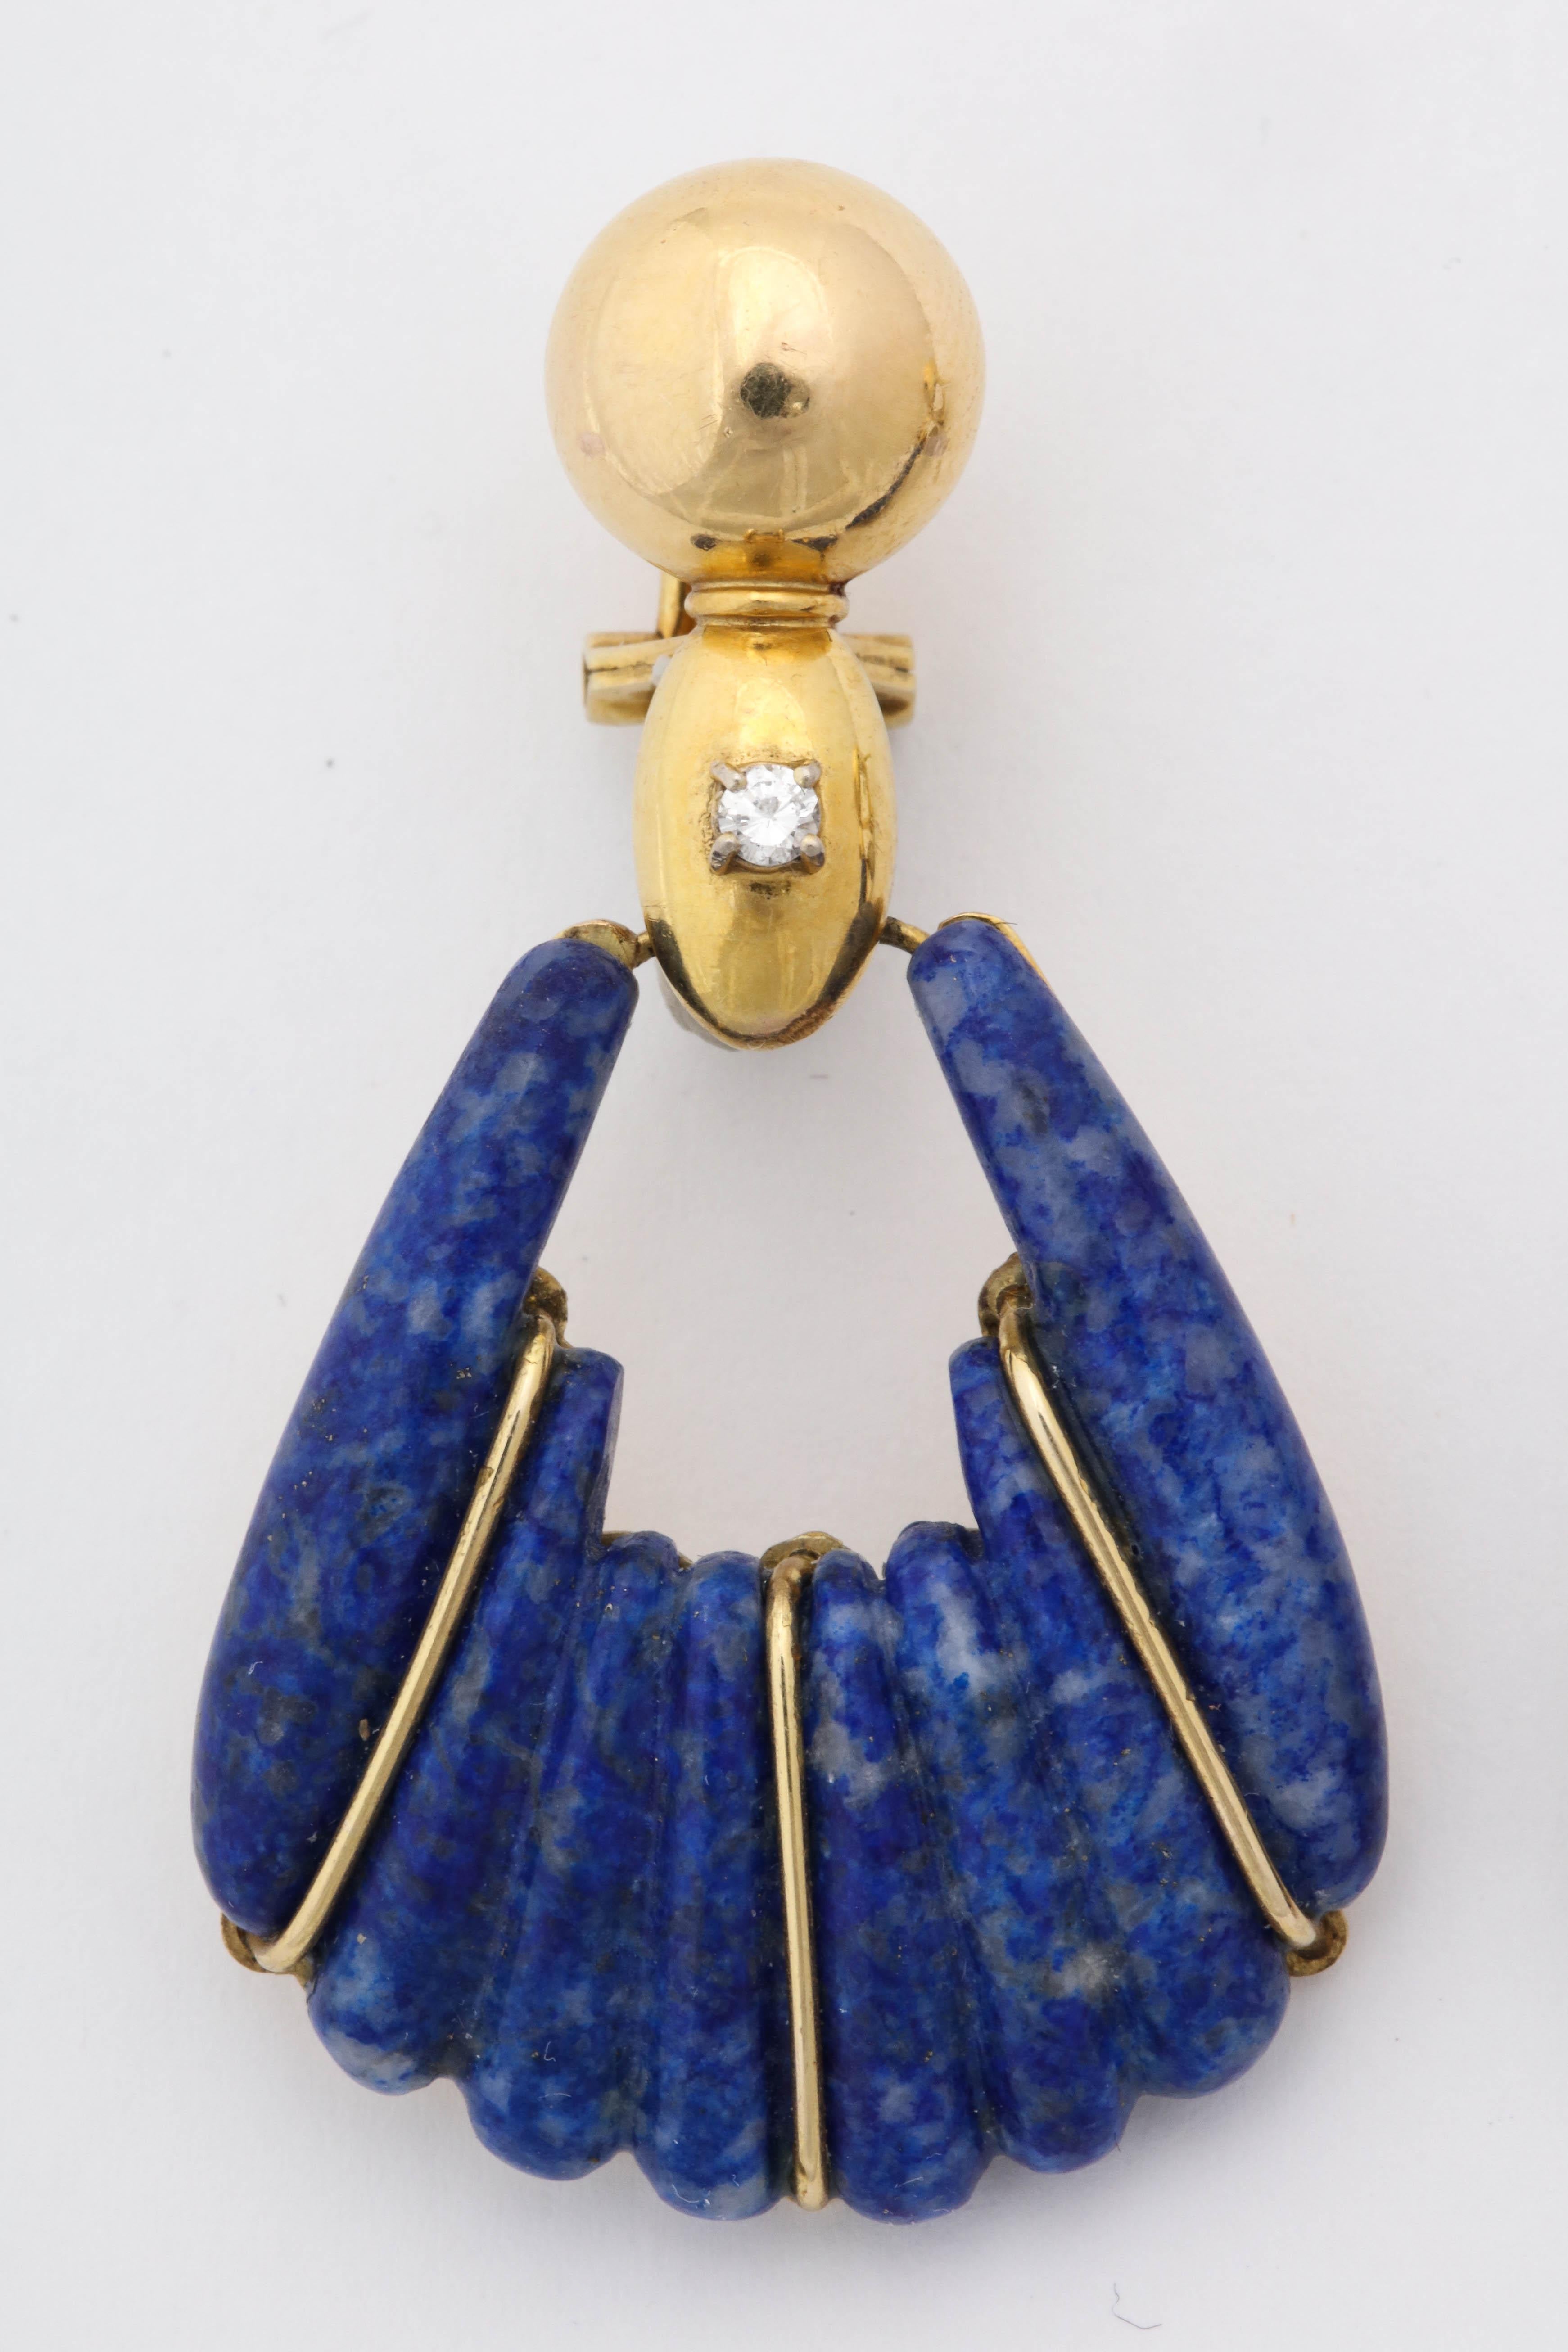 One Pair Of Ladies 14kt Yellow Gold Hanging And Moveable Carved Lapis Lazuli Earrings With 14kt Gold Ball Tops Embellished With Two Full Cut Diamonds. Made In The United States Of America In The 1970's. NOTE Posts May Be Removed For Non Pierced Ears.